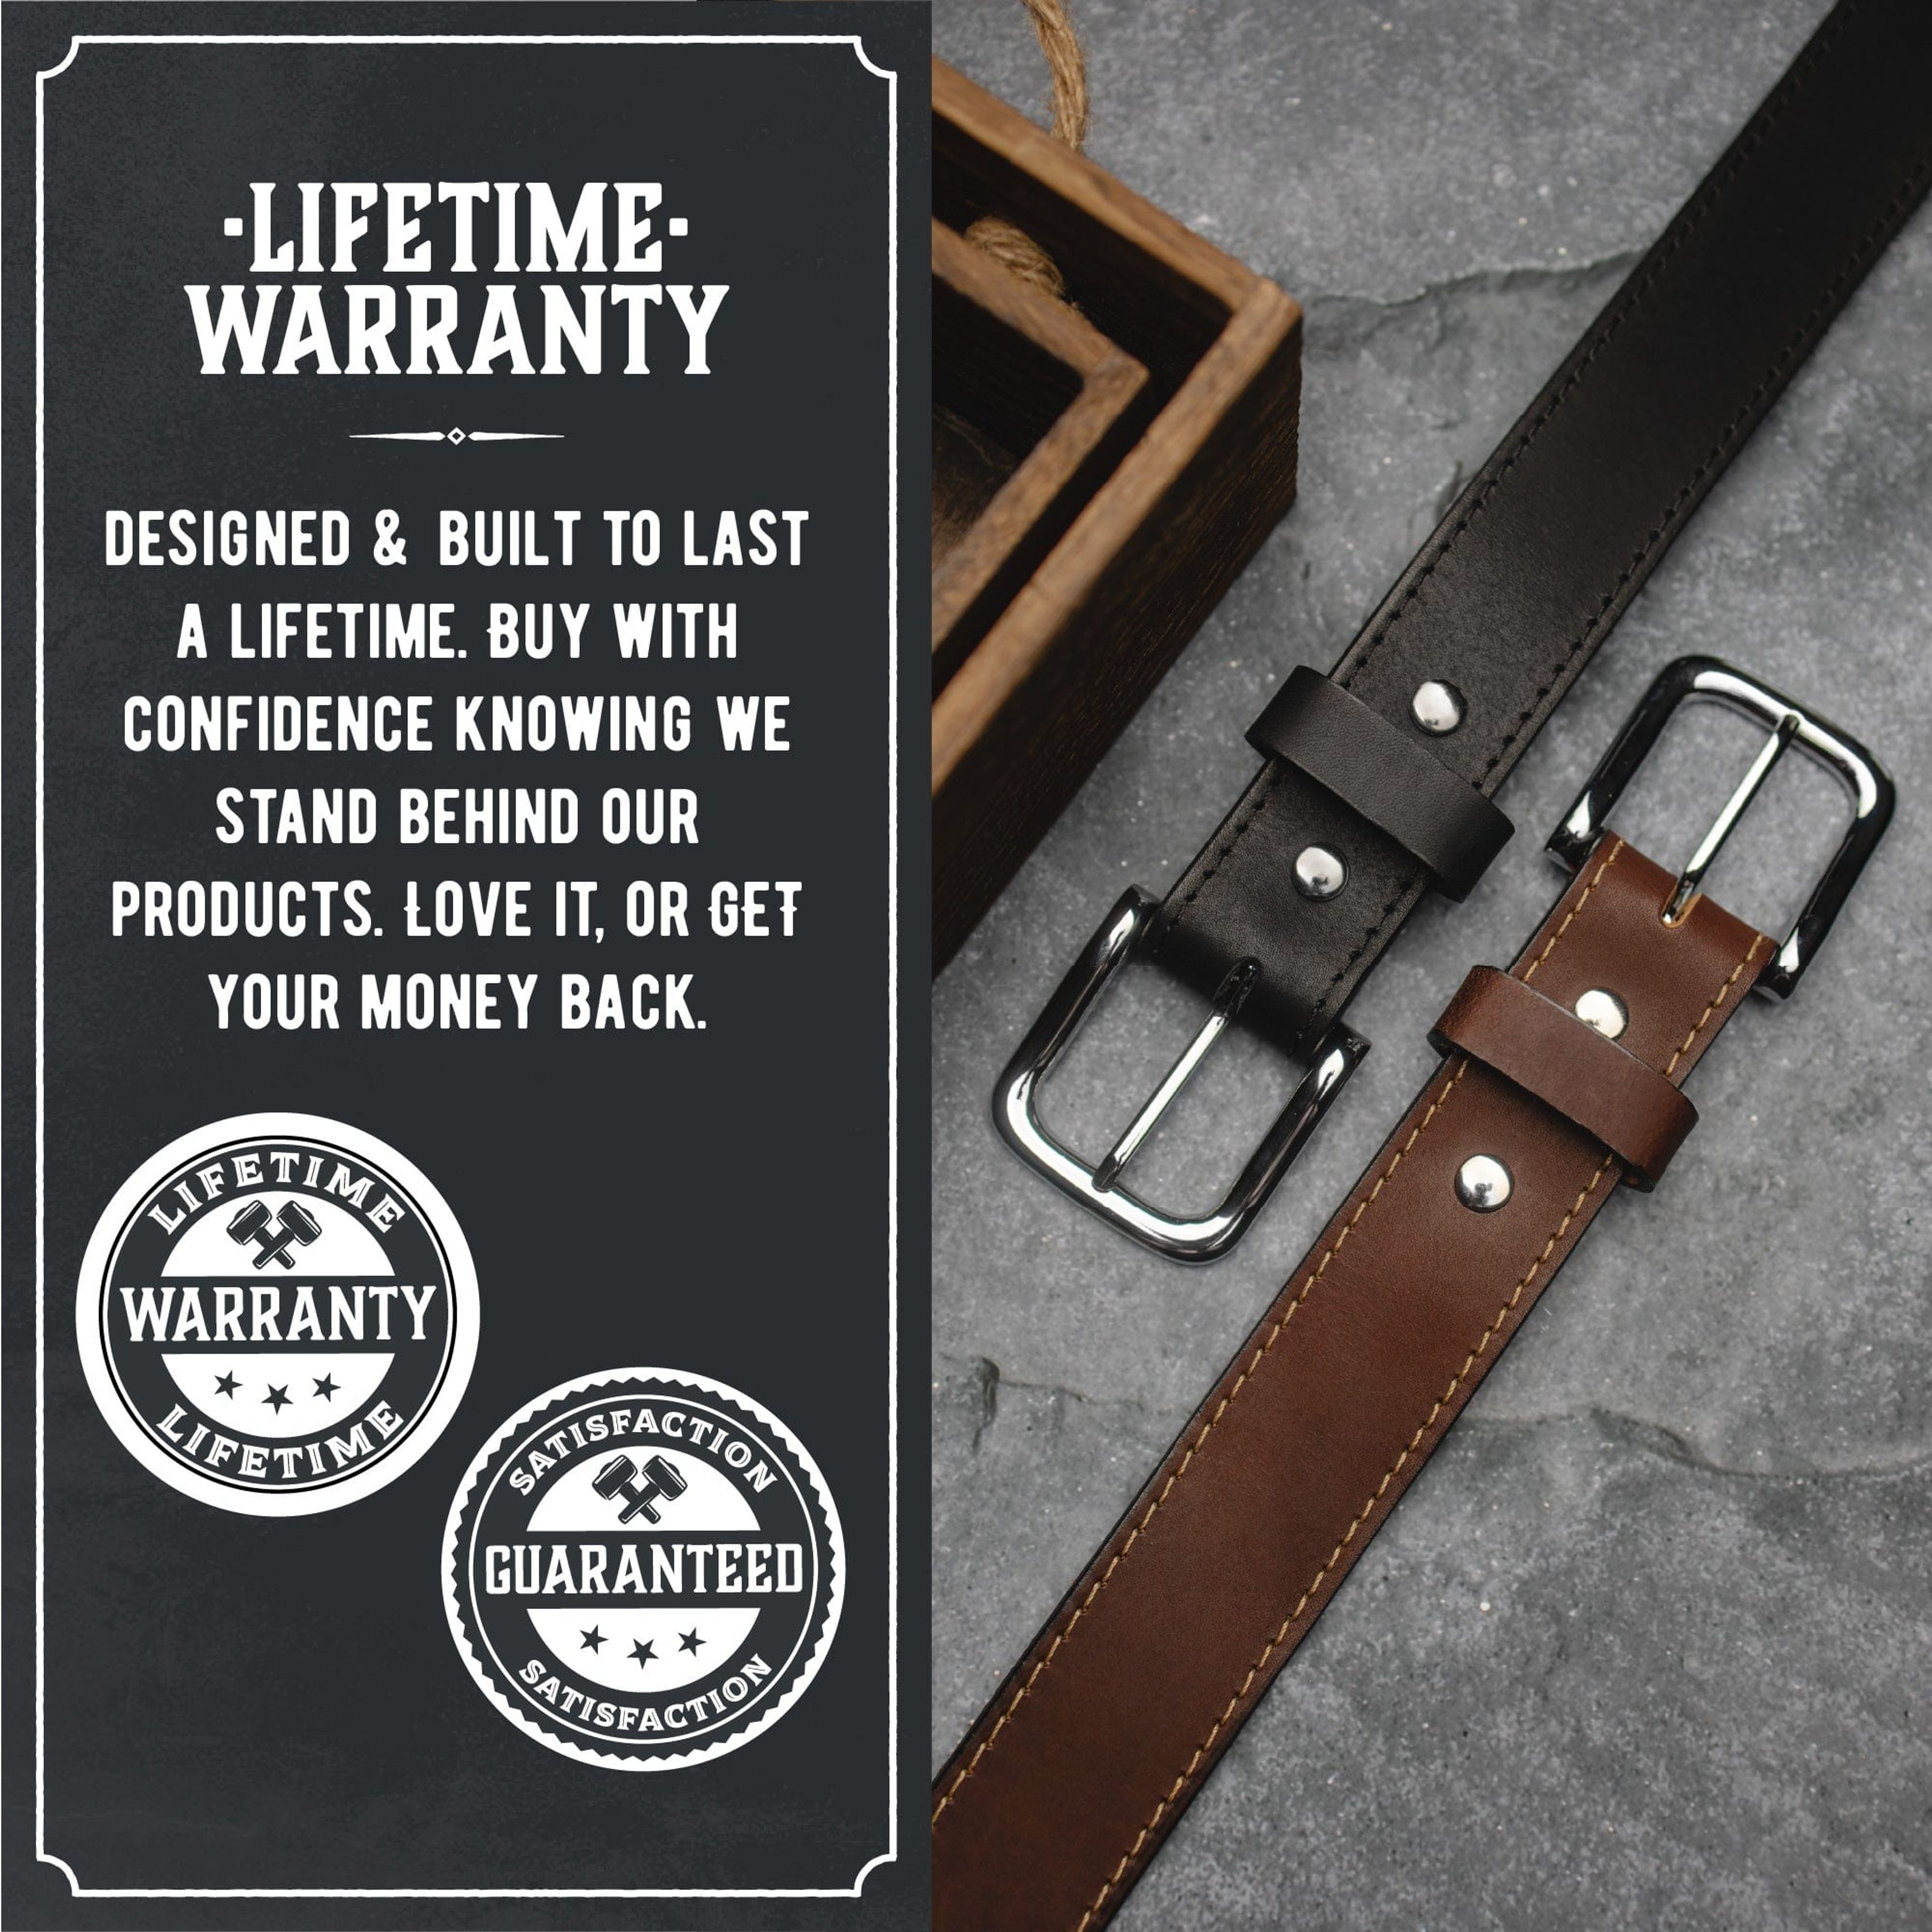 The Foreman Leather Belt